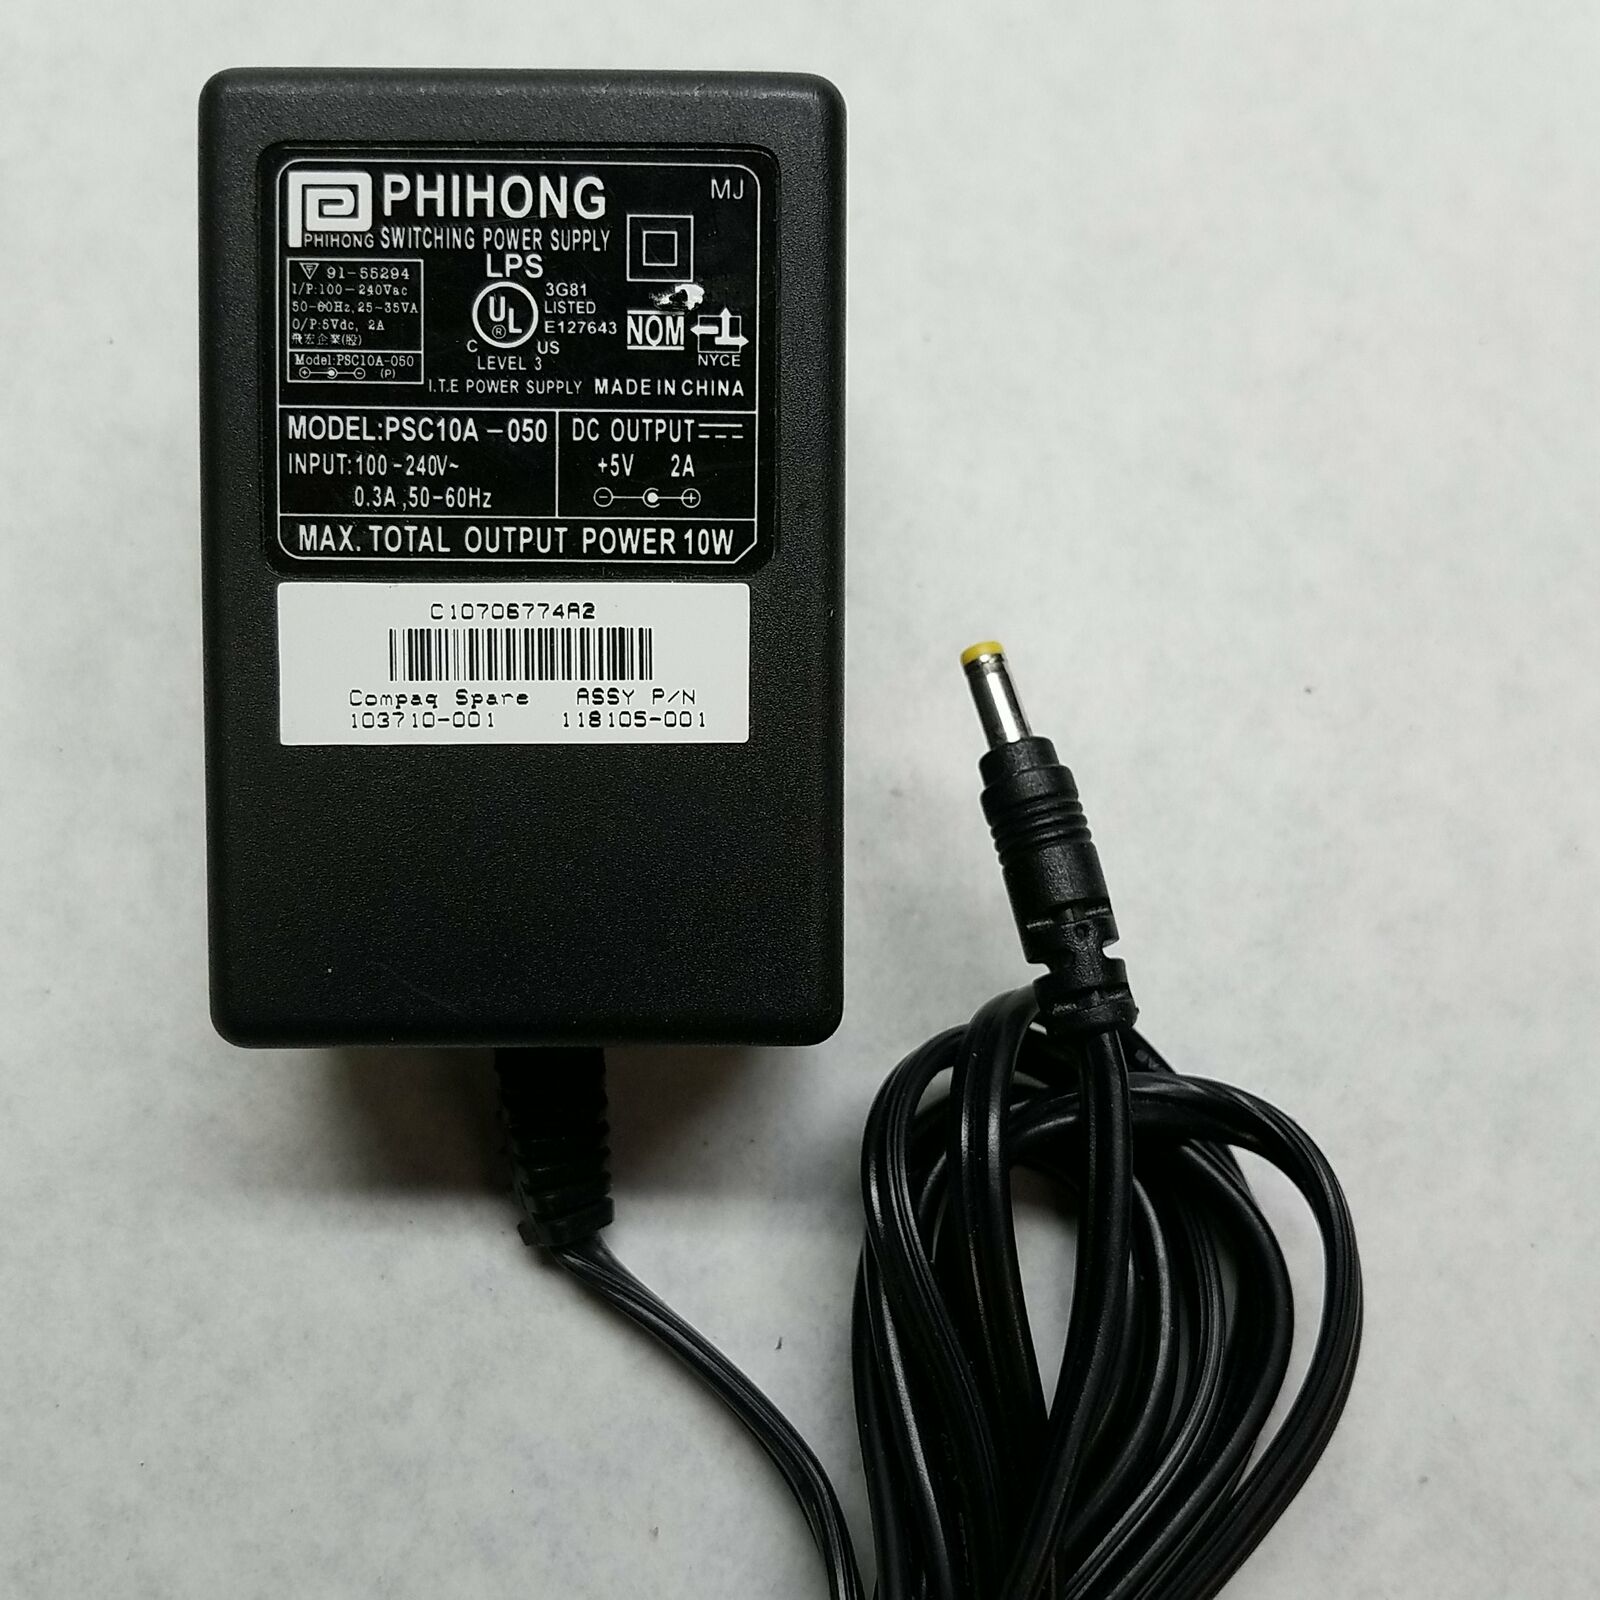 New Phihong PSC10A-050 118105-001 5V 2A Switching Power Supply ac adapter - Click Image to Close